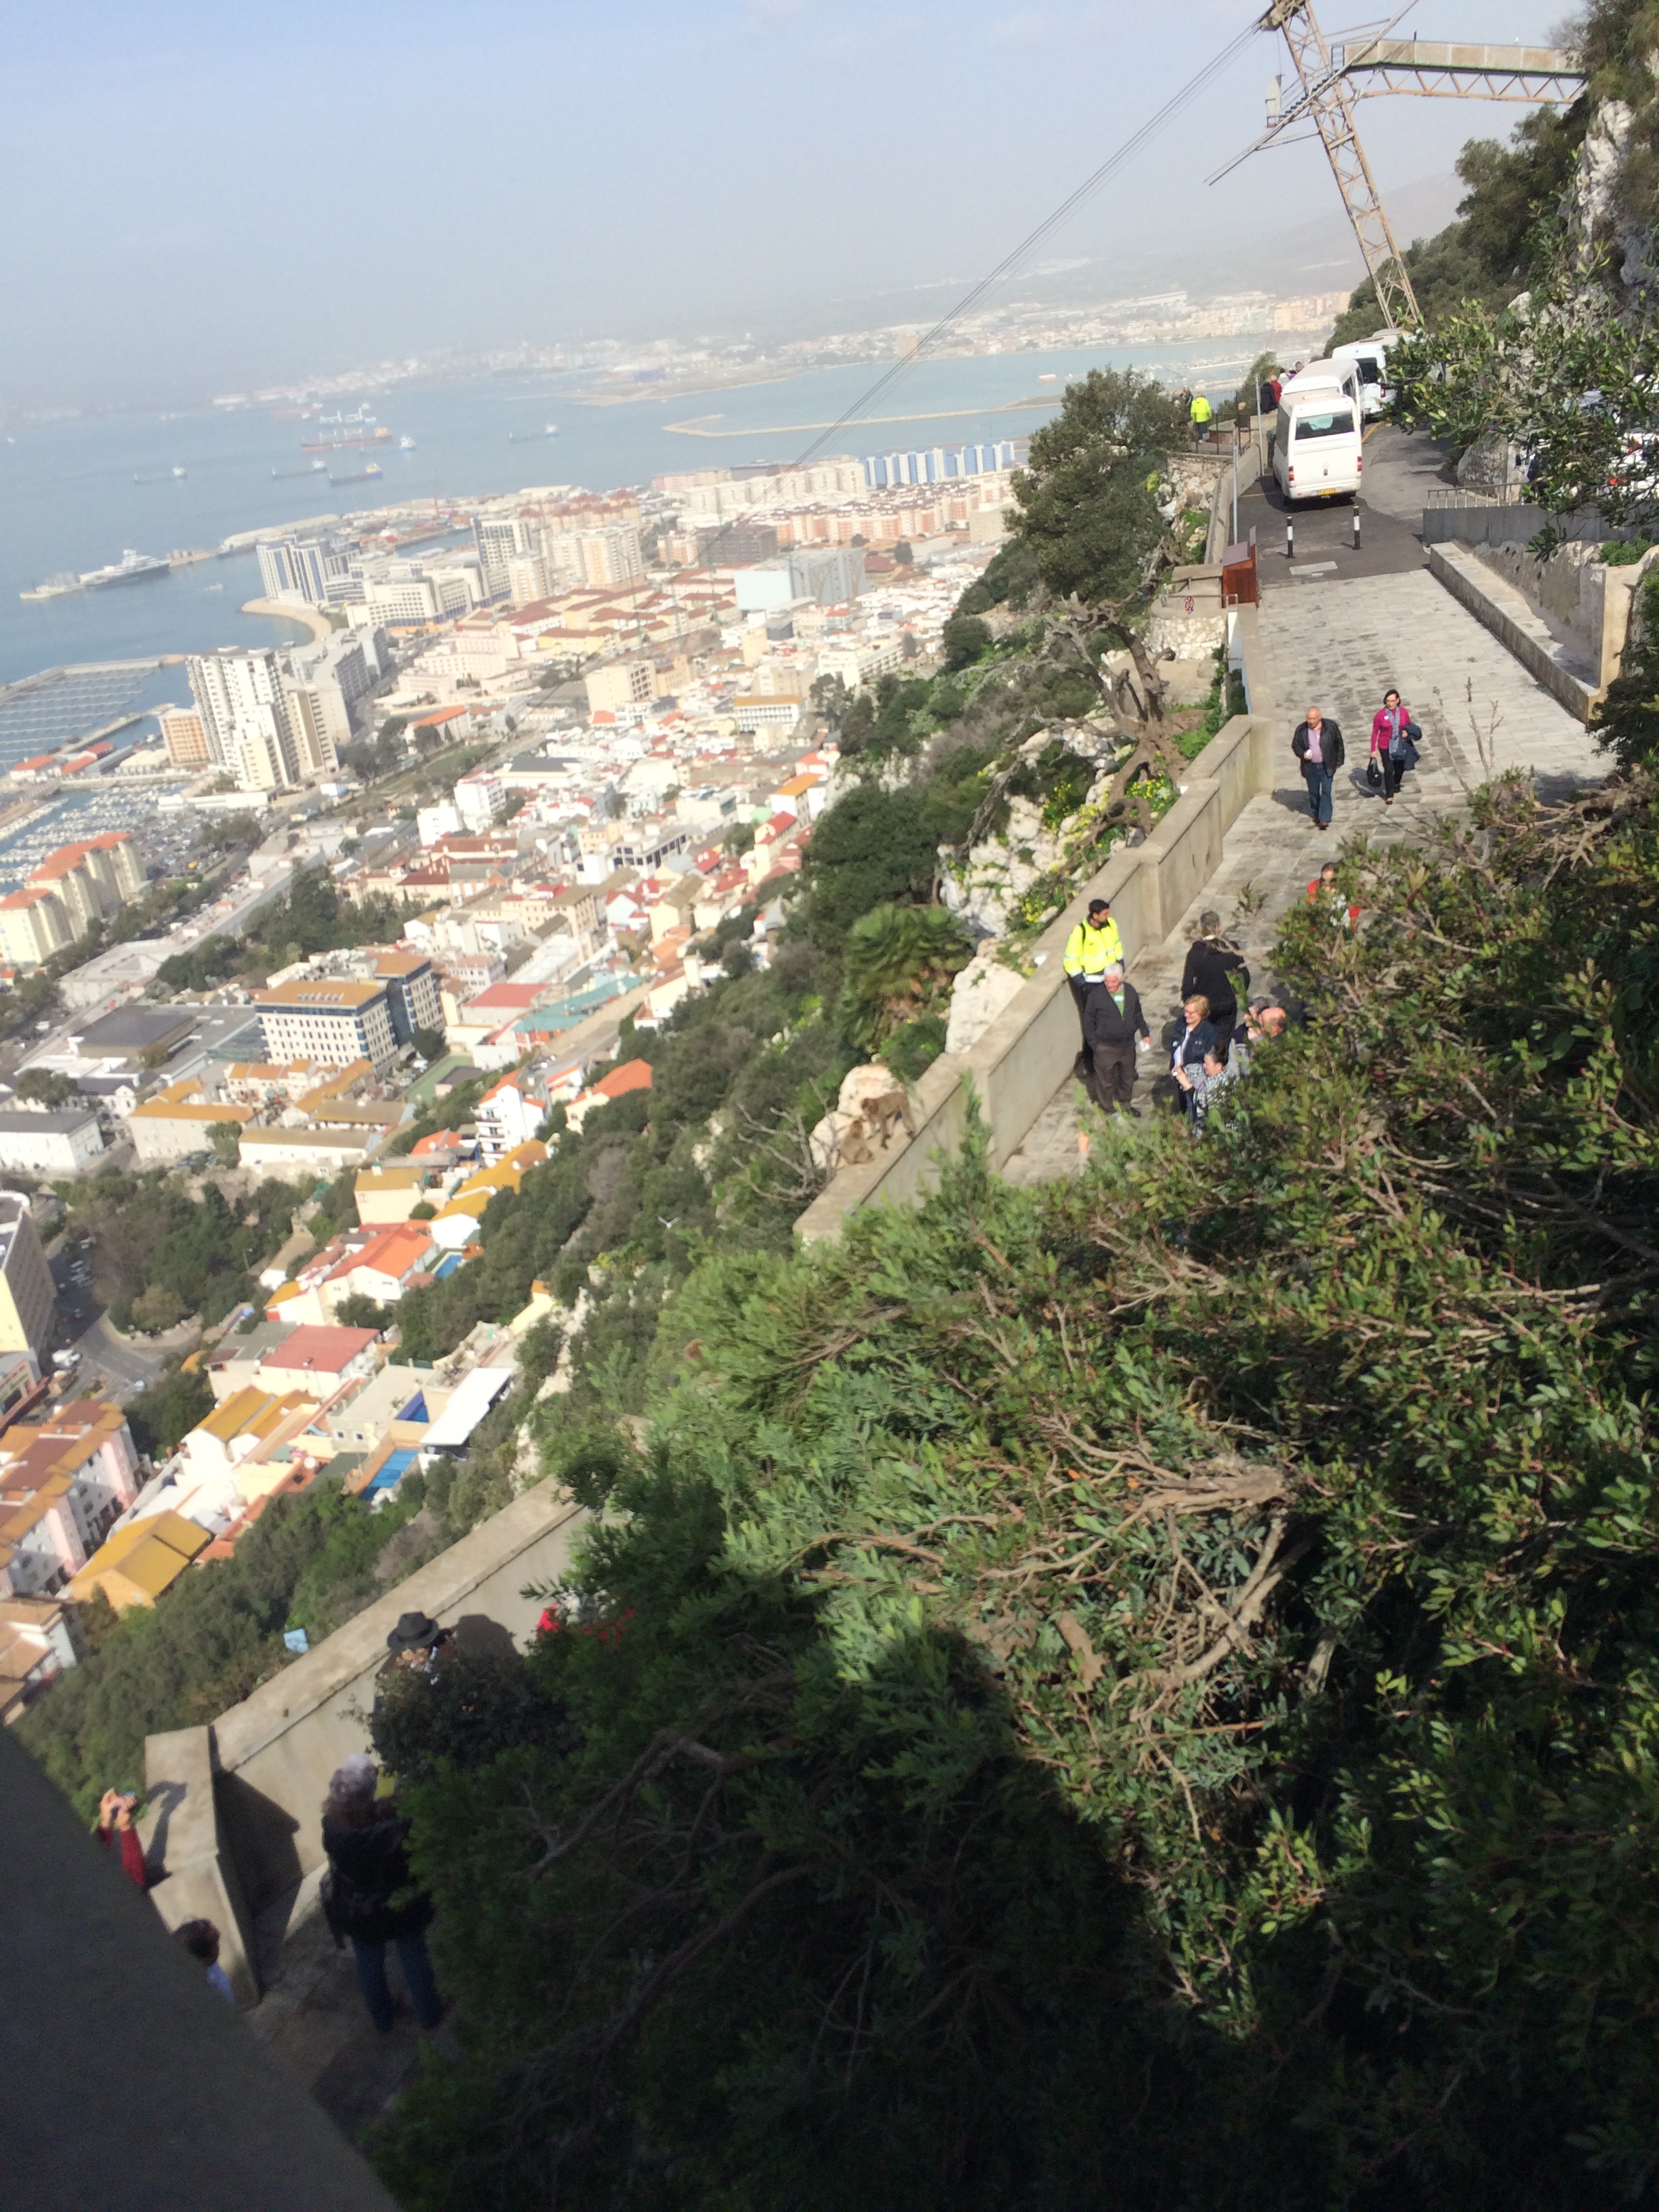 Image from the top of the rock of Gibraltar